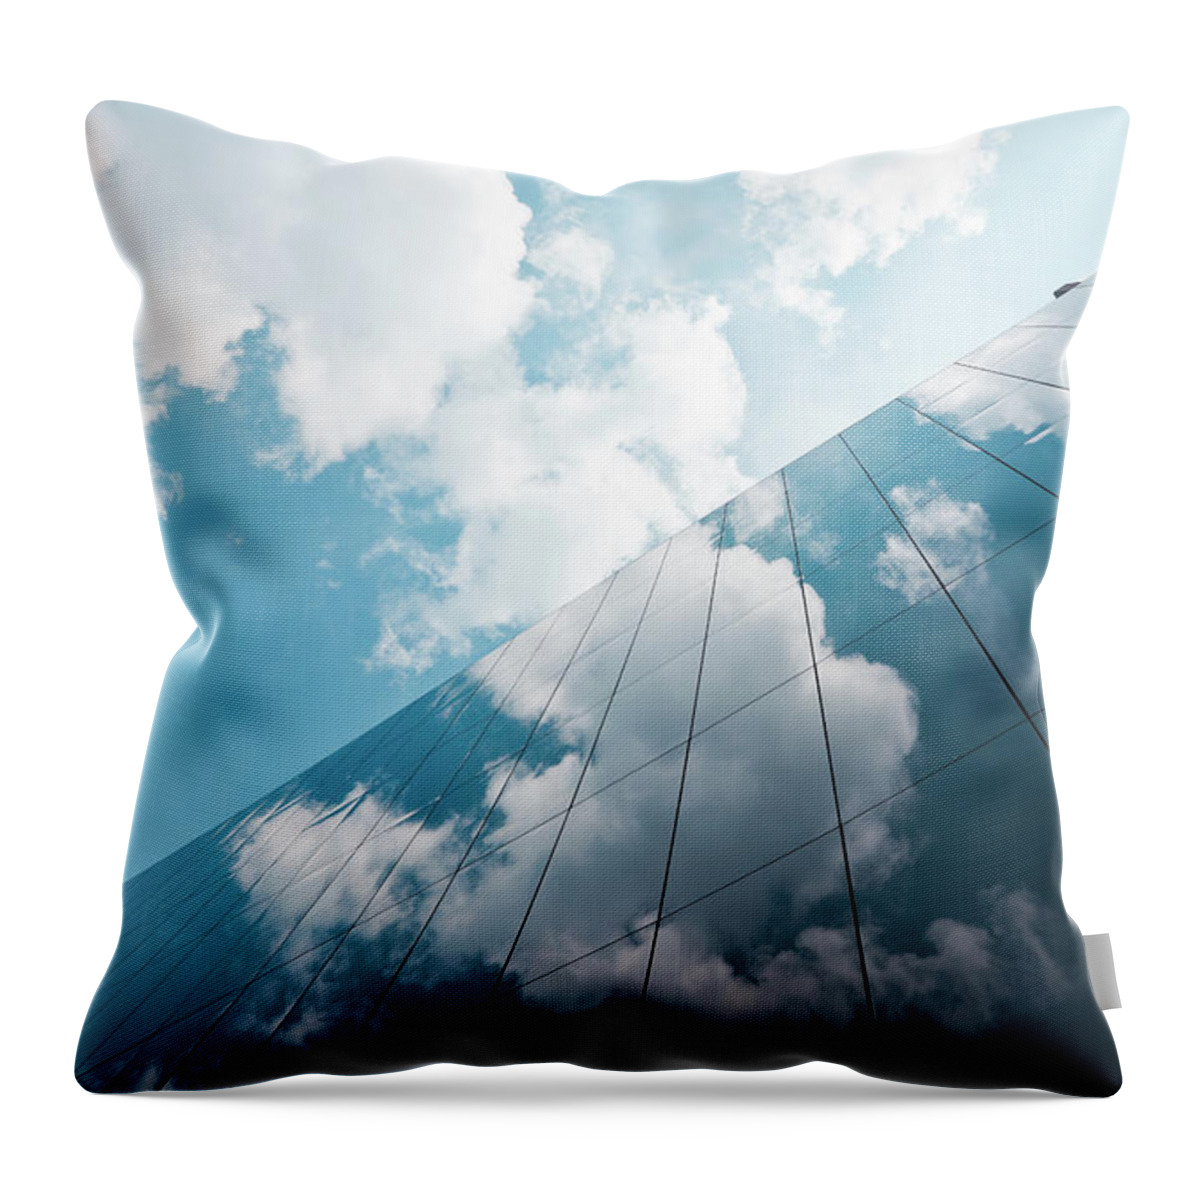 Working Throw Pillow featuring the photograph London Corporate Buildings by Zodebala